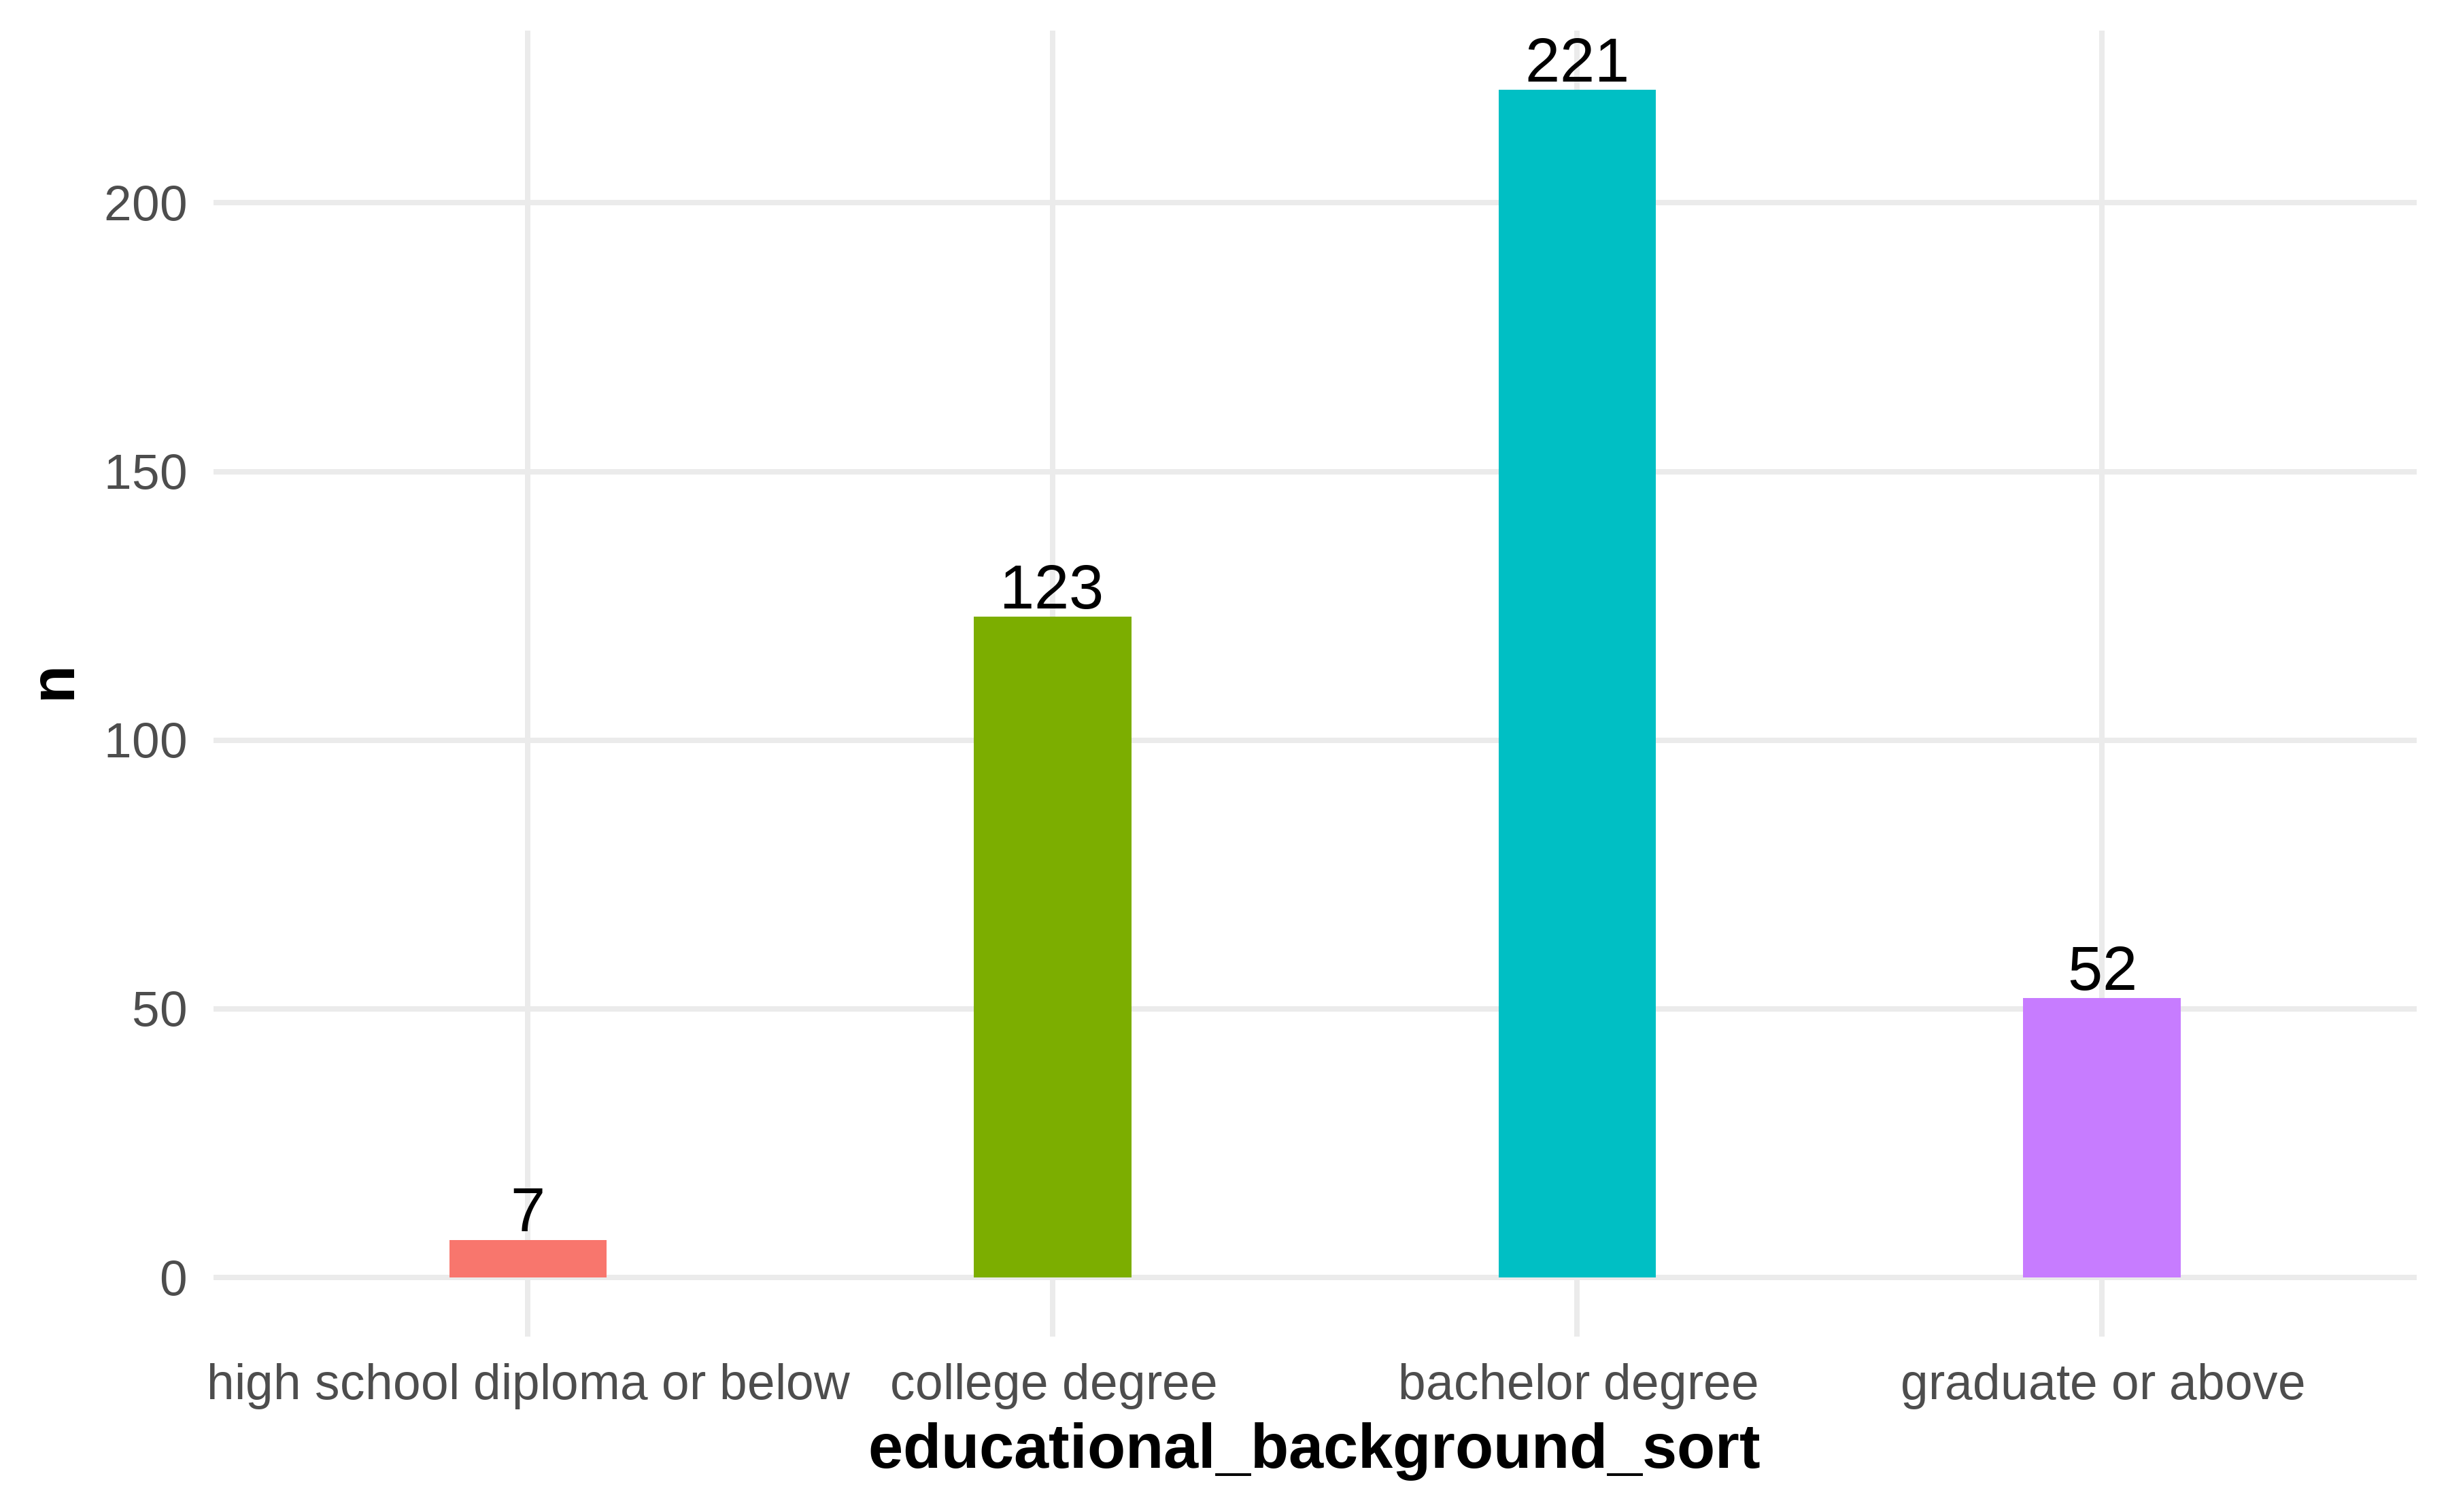 Frequency and Percentage of Educational Background